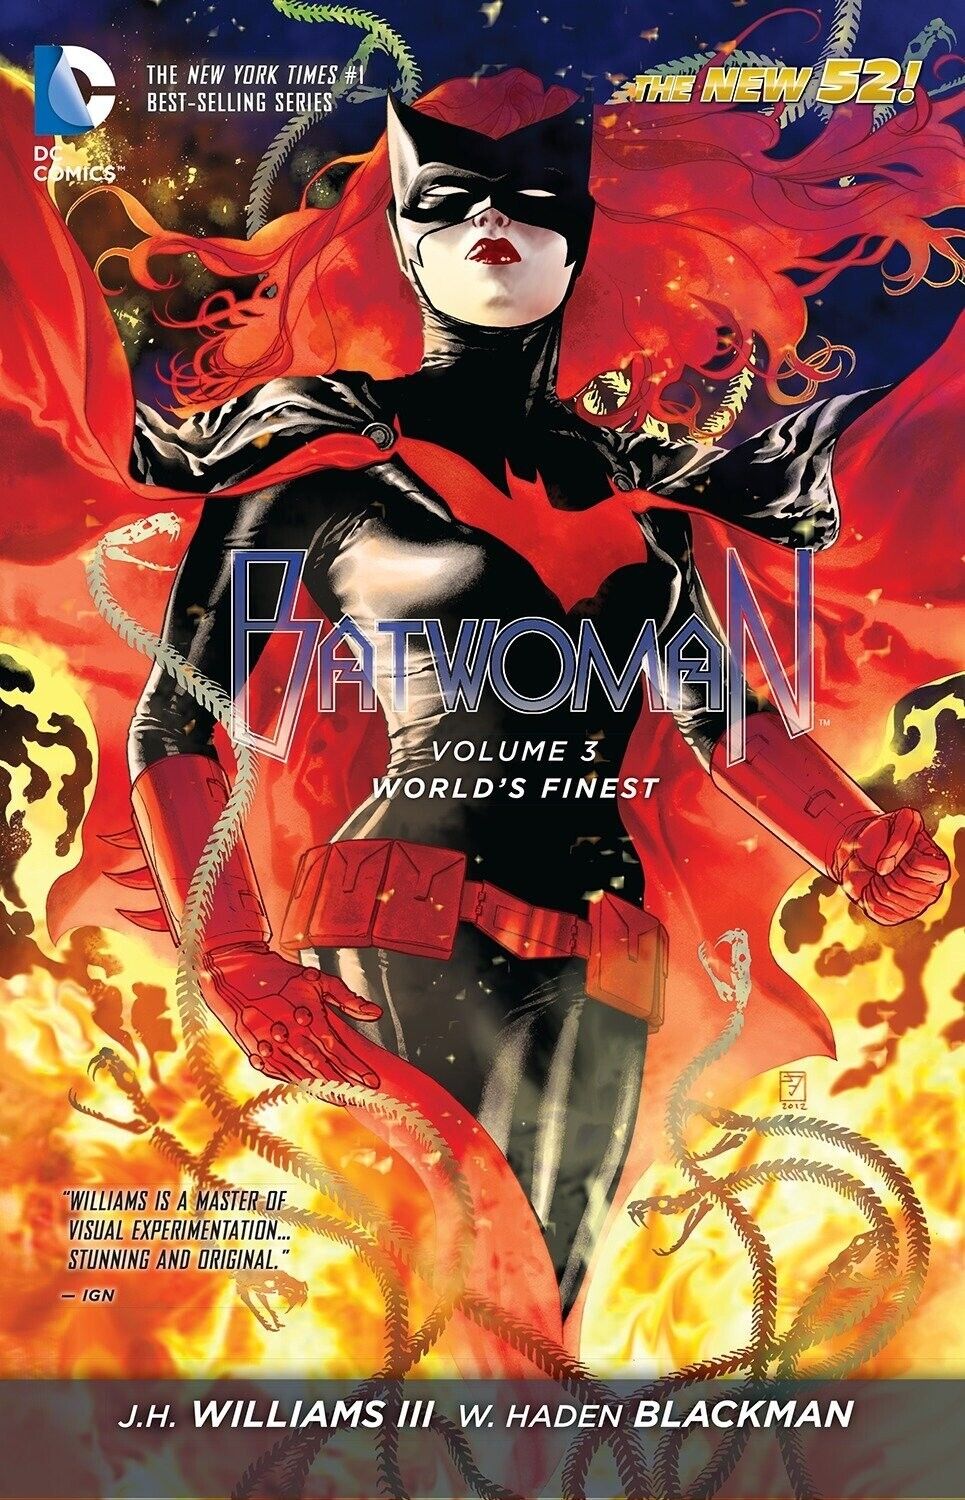 Batwoman Vol. 3: World's Finest (The New 52) by Williams III, J.H. in New